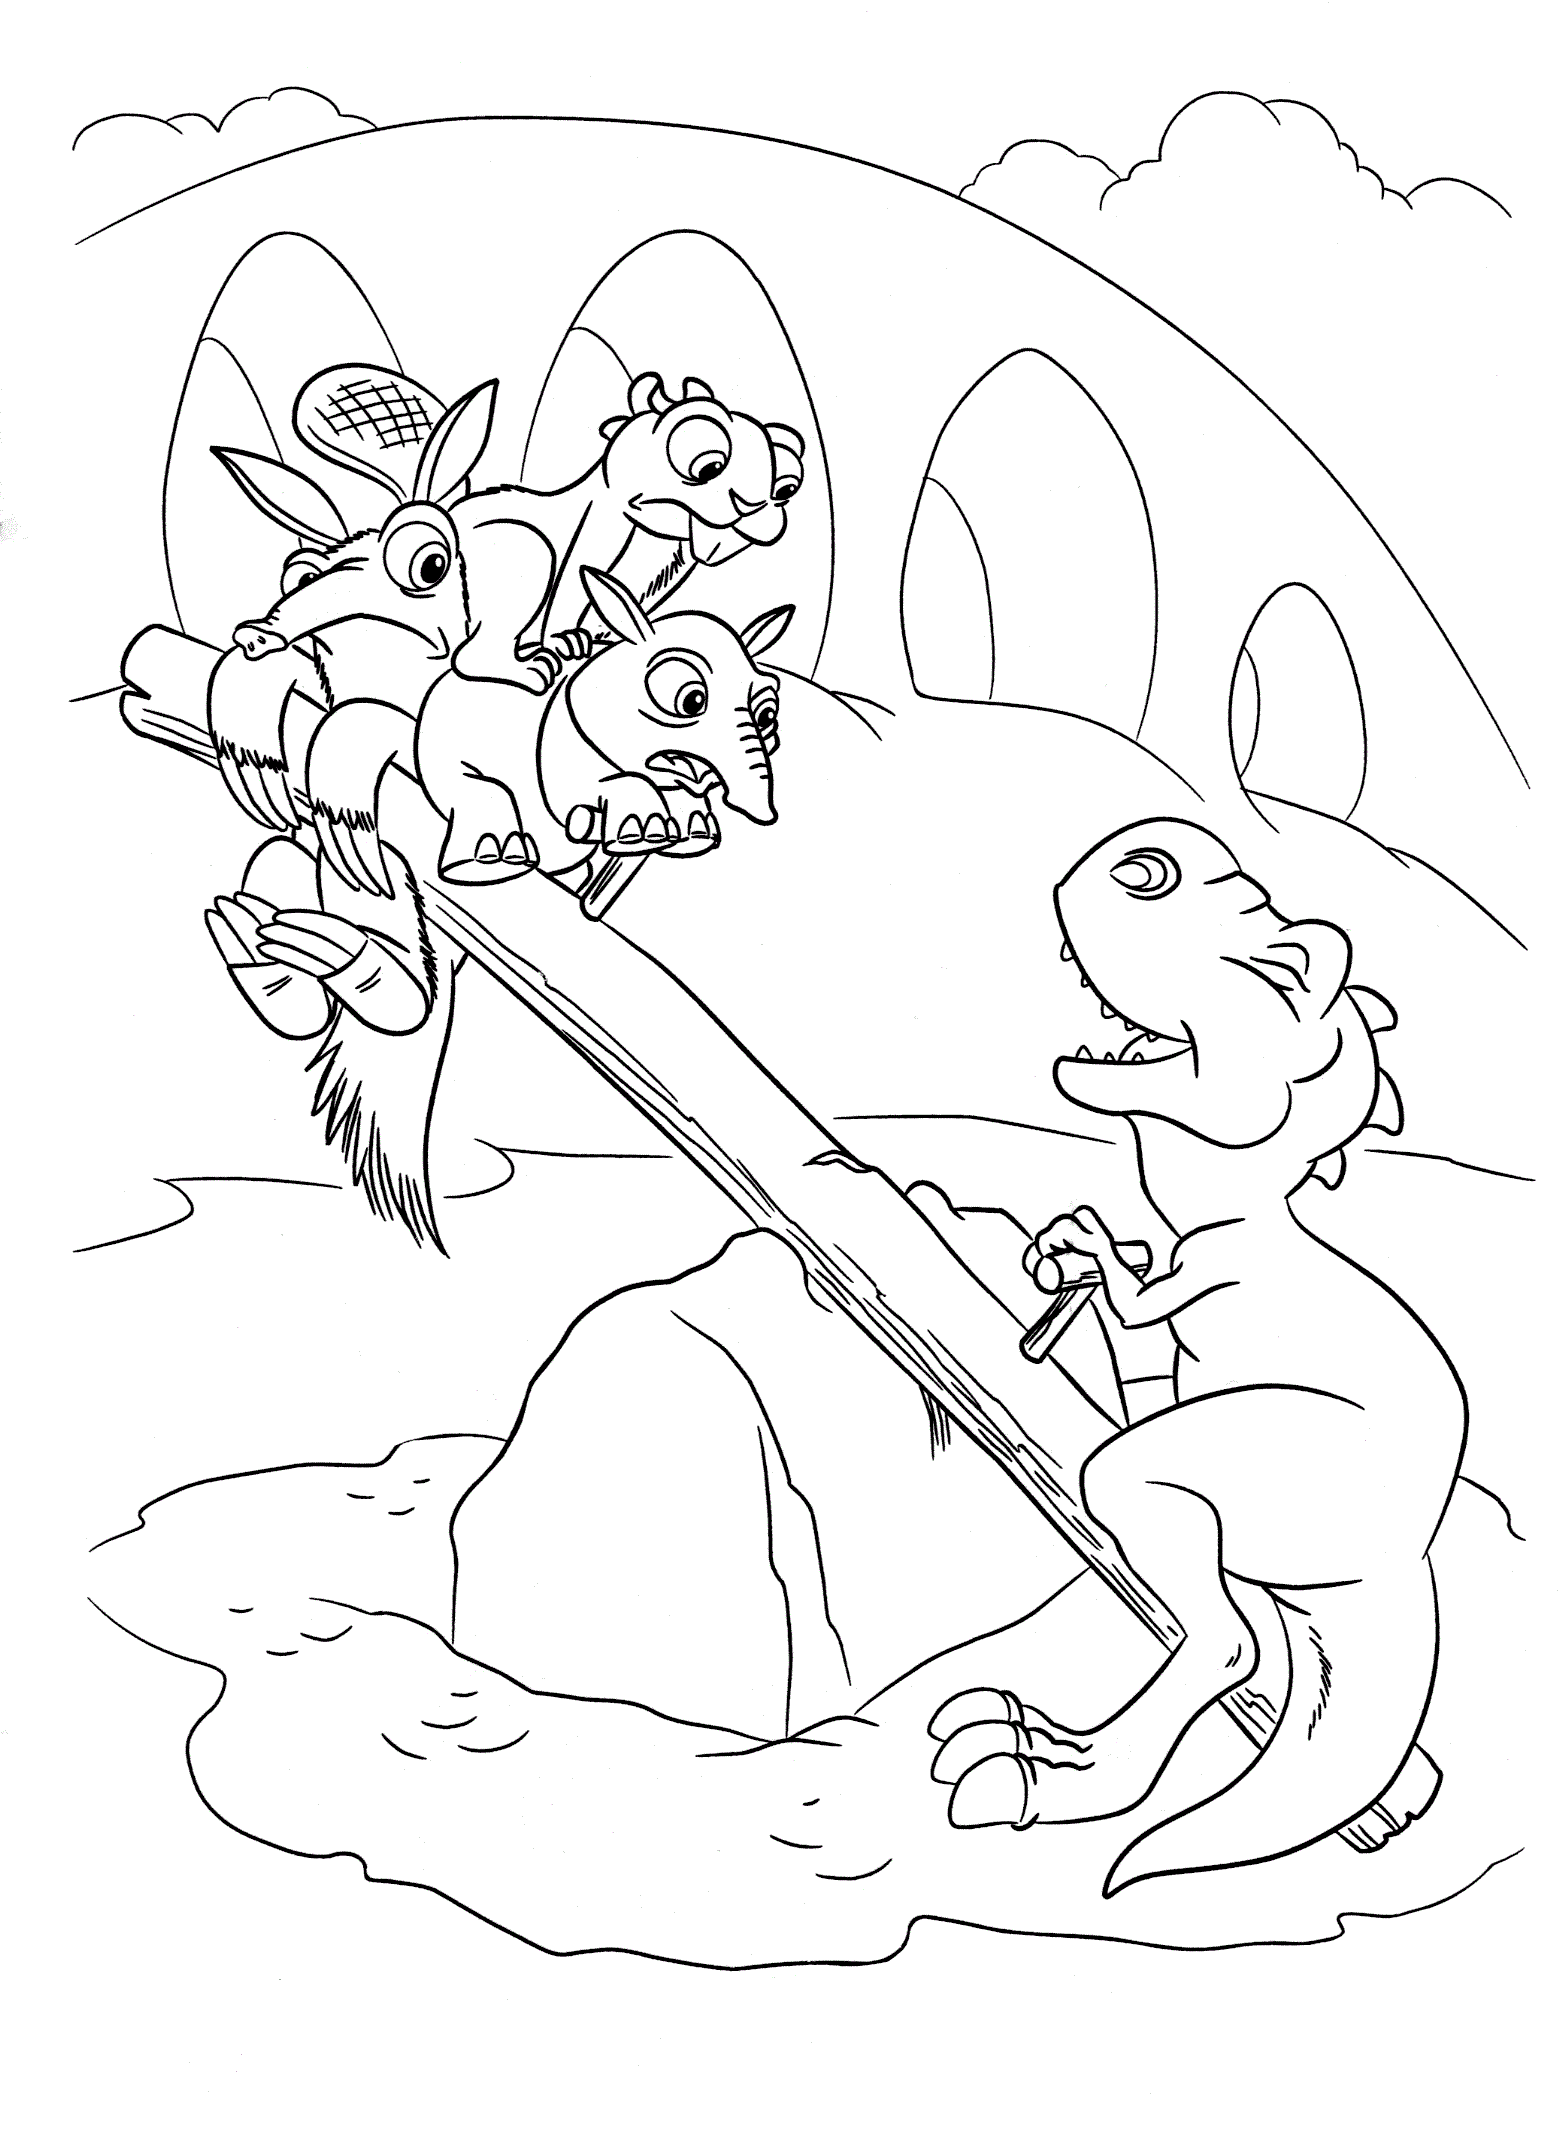 Ice Age of the Dinosaurs 2 coloring pages - www.coloringpaint.com